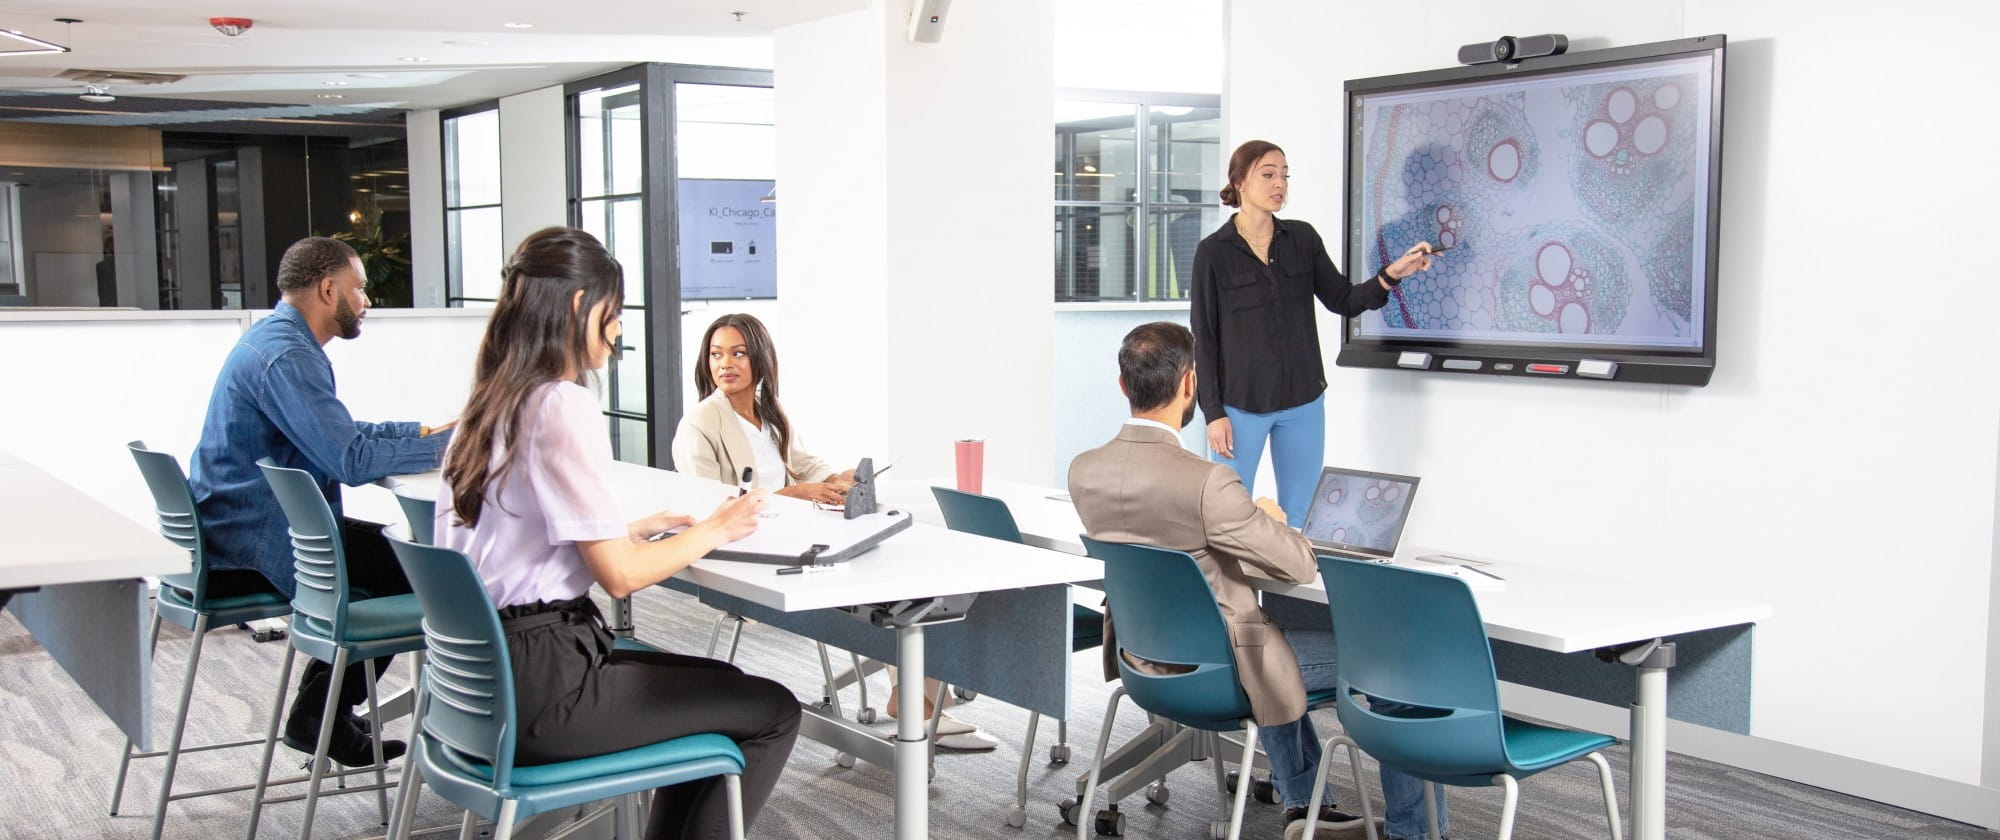 A presenter uses a SMART board to show a biological image in a well-lit modern meeting room, illustrating the use of interactive displays for collaborative work.